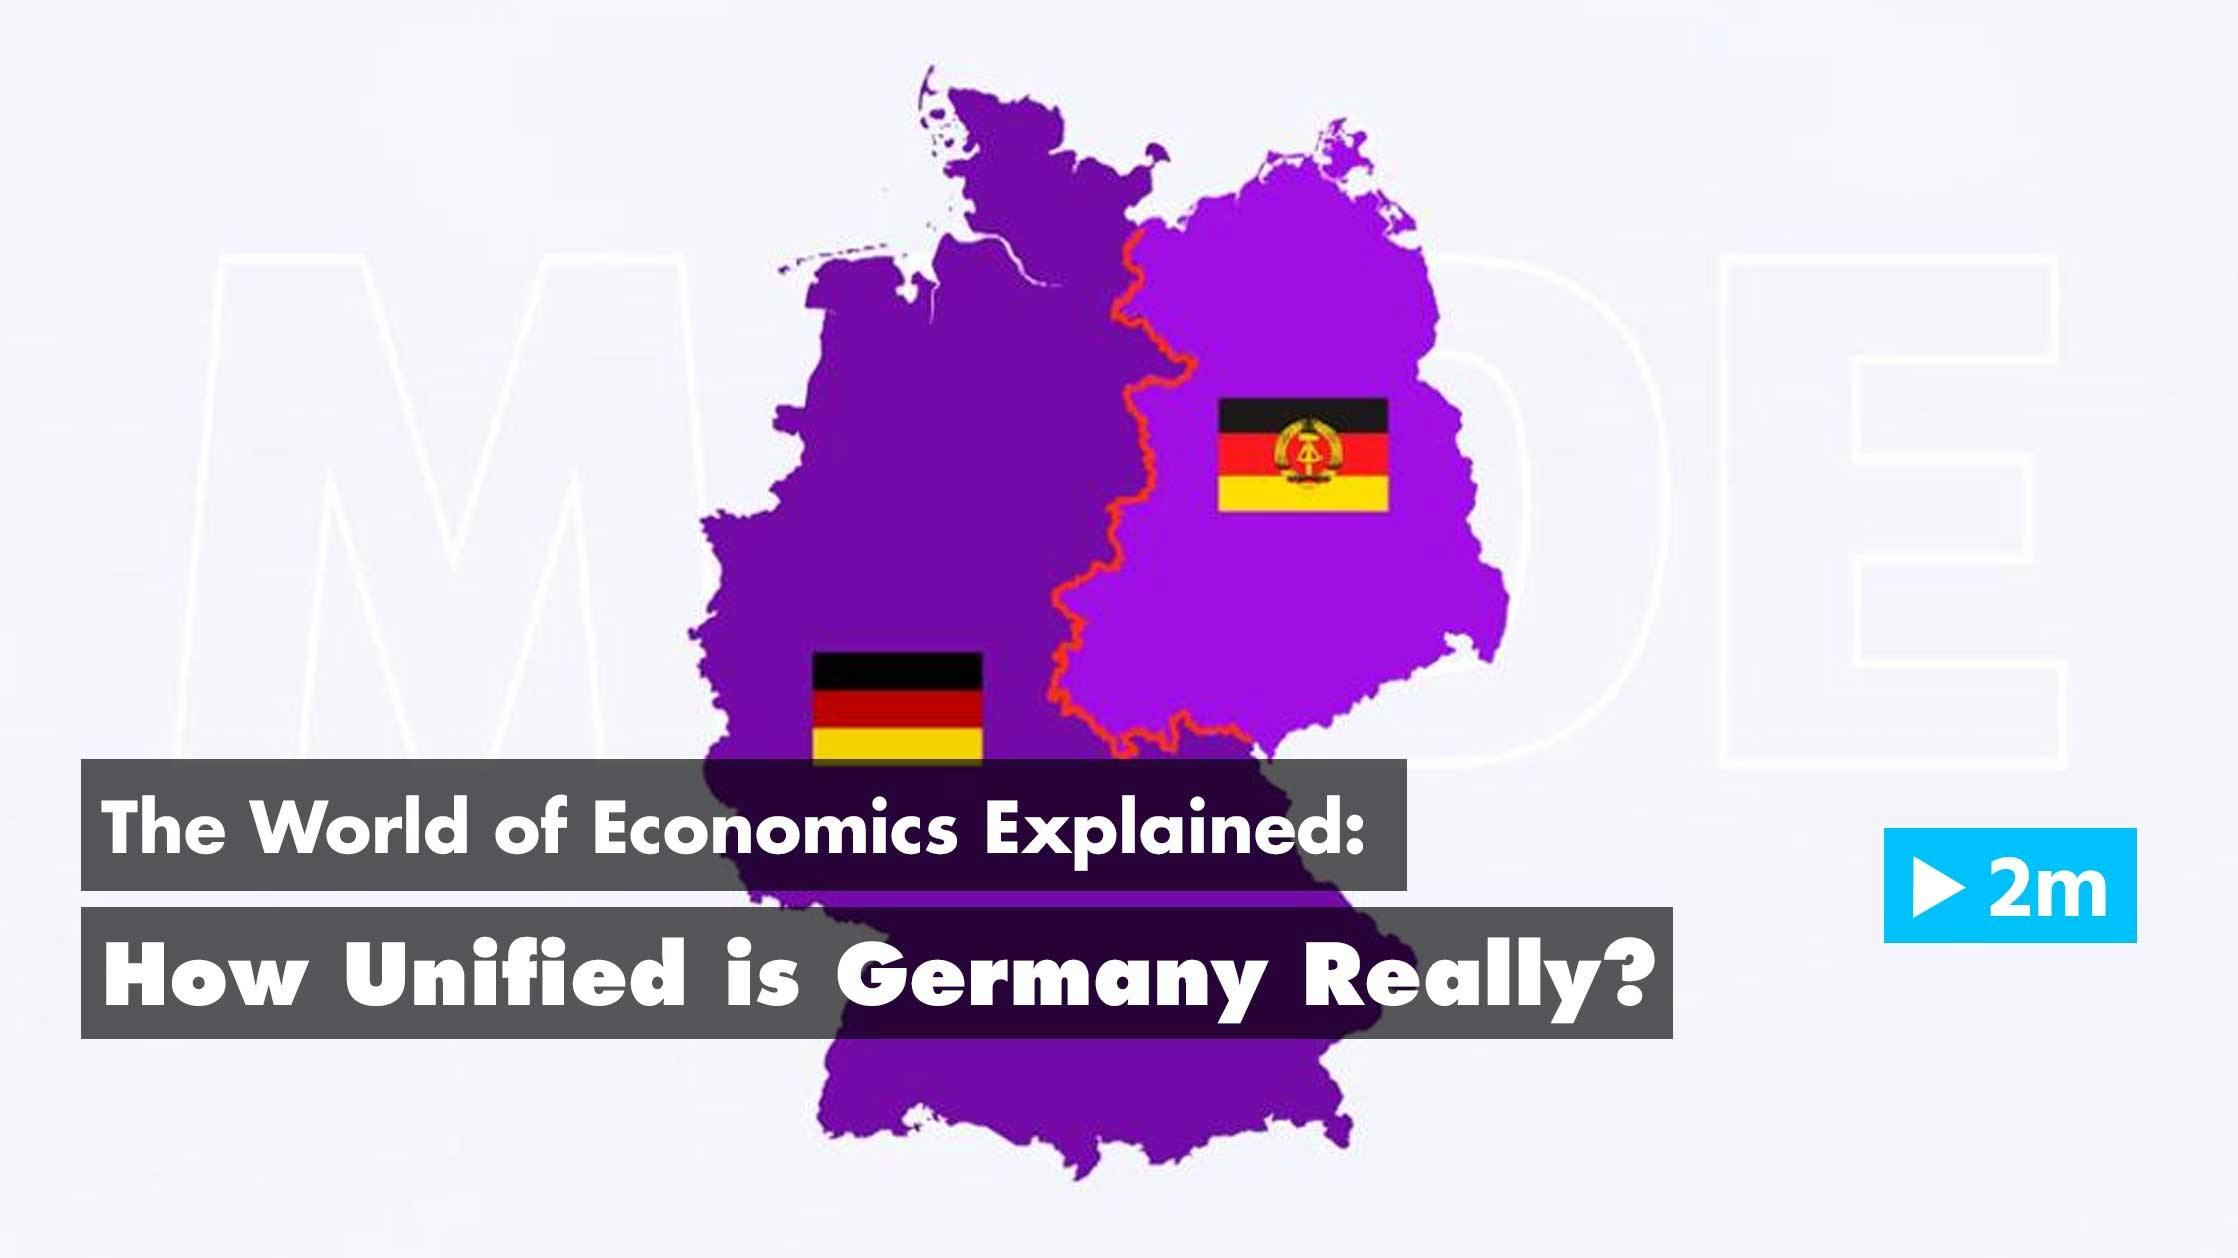 The World of Economics Explained: How unified is Germany really?